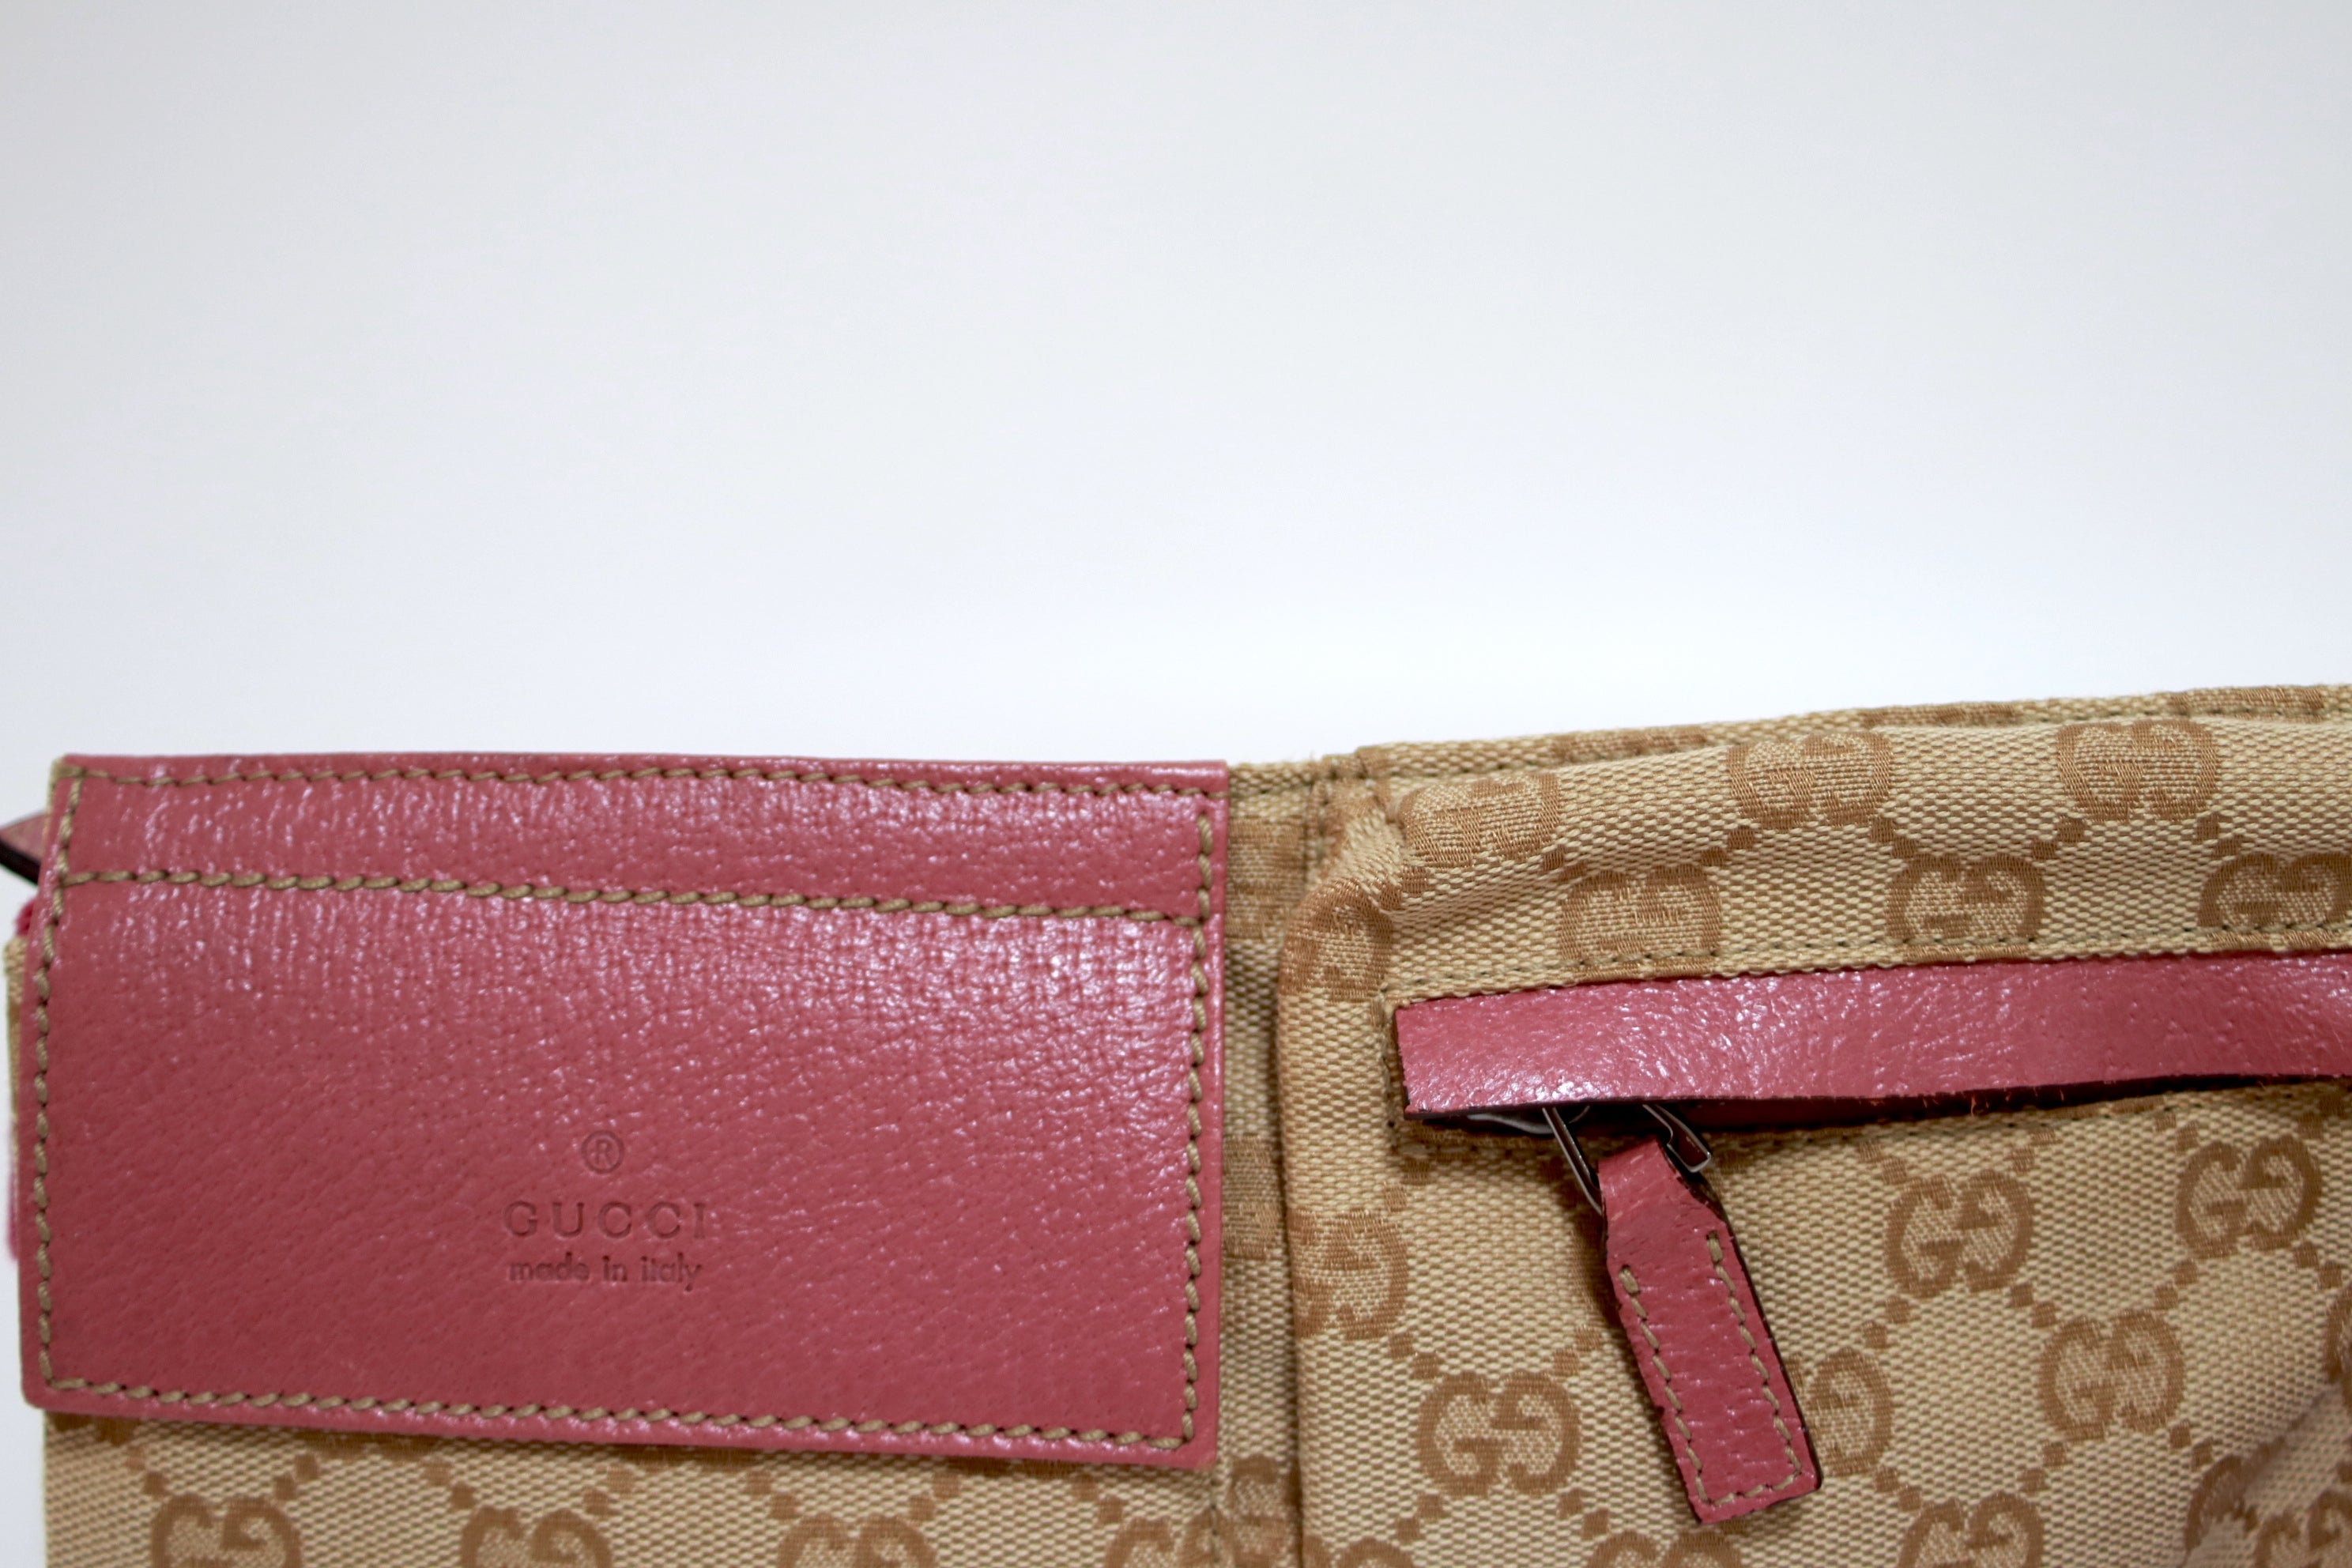 Gucci Waist Bag Pink and Brown Used (7323)